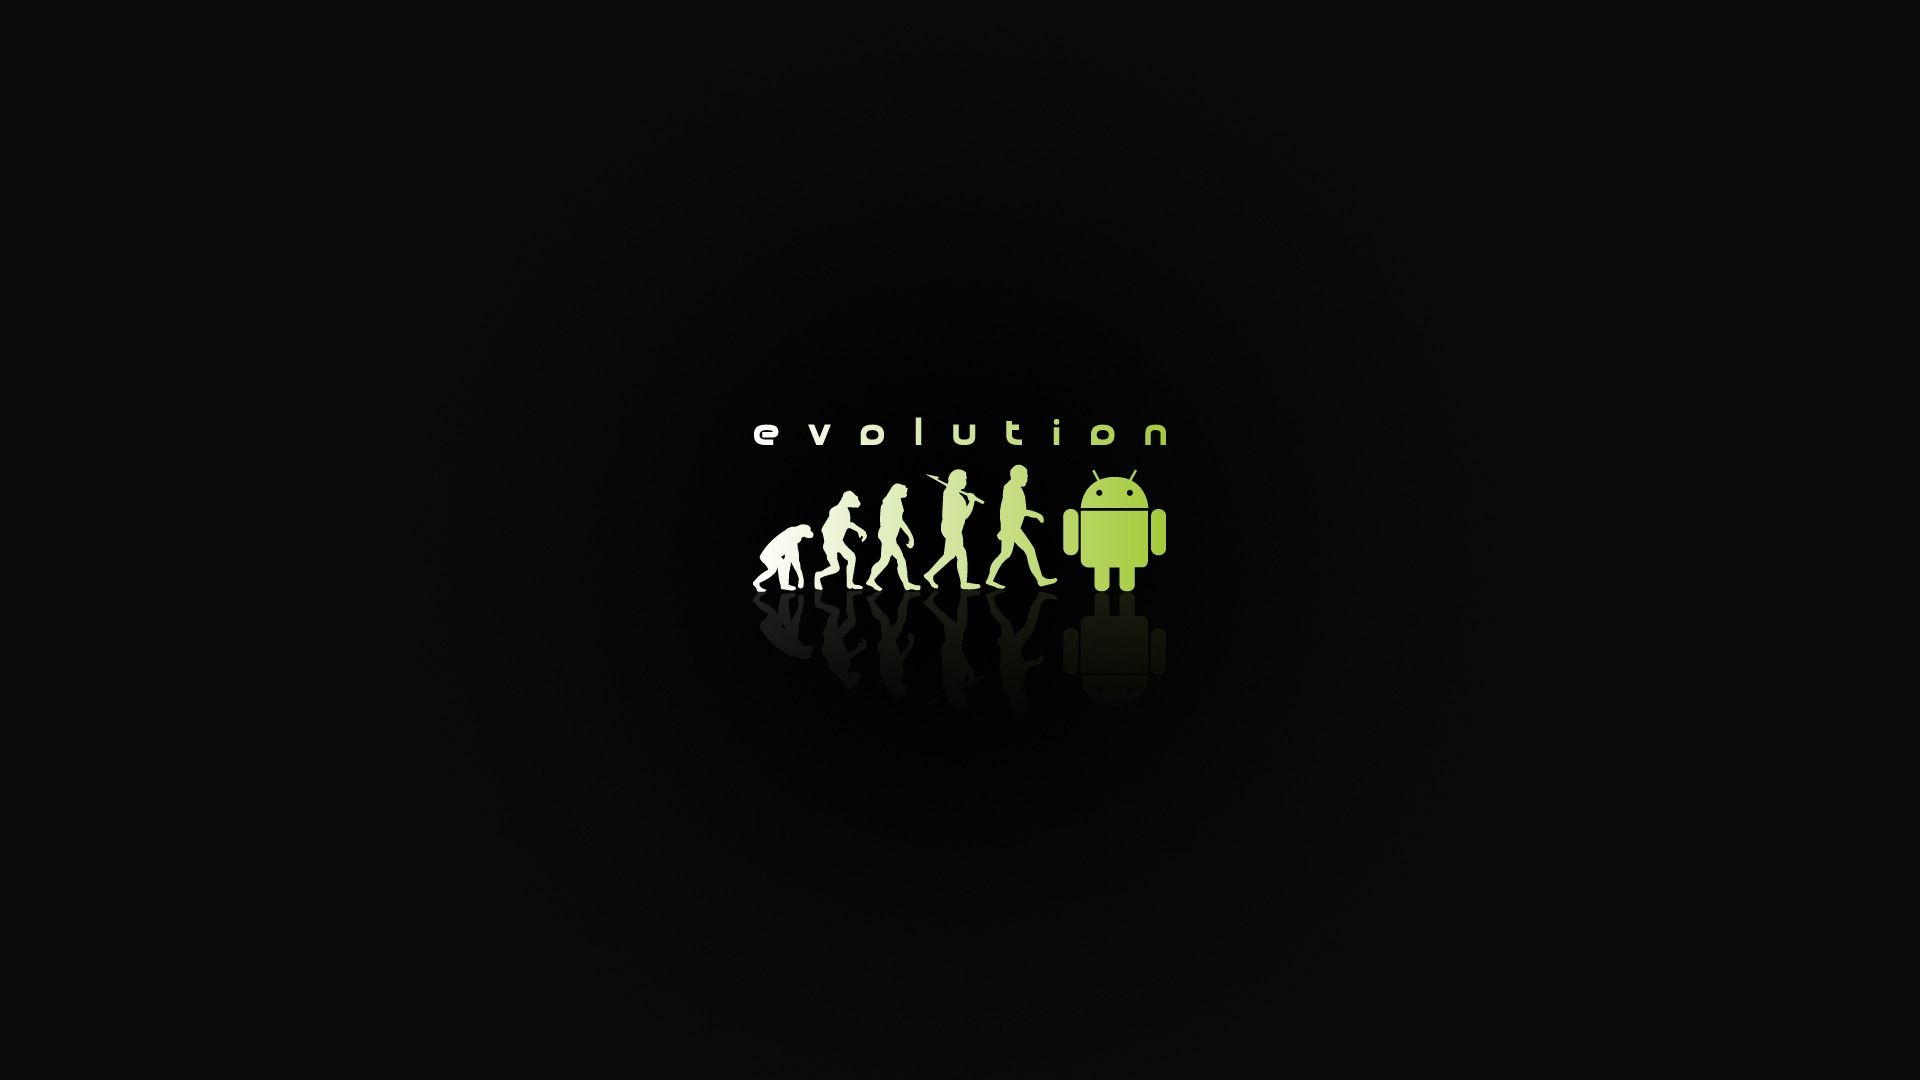 Android Logo Full HD Wallpaper. Android wallpaper, Android, Evolution